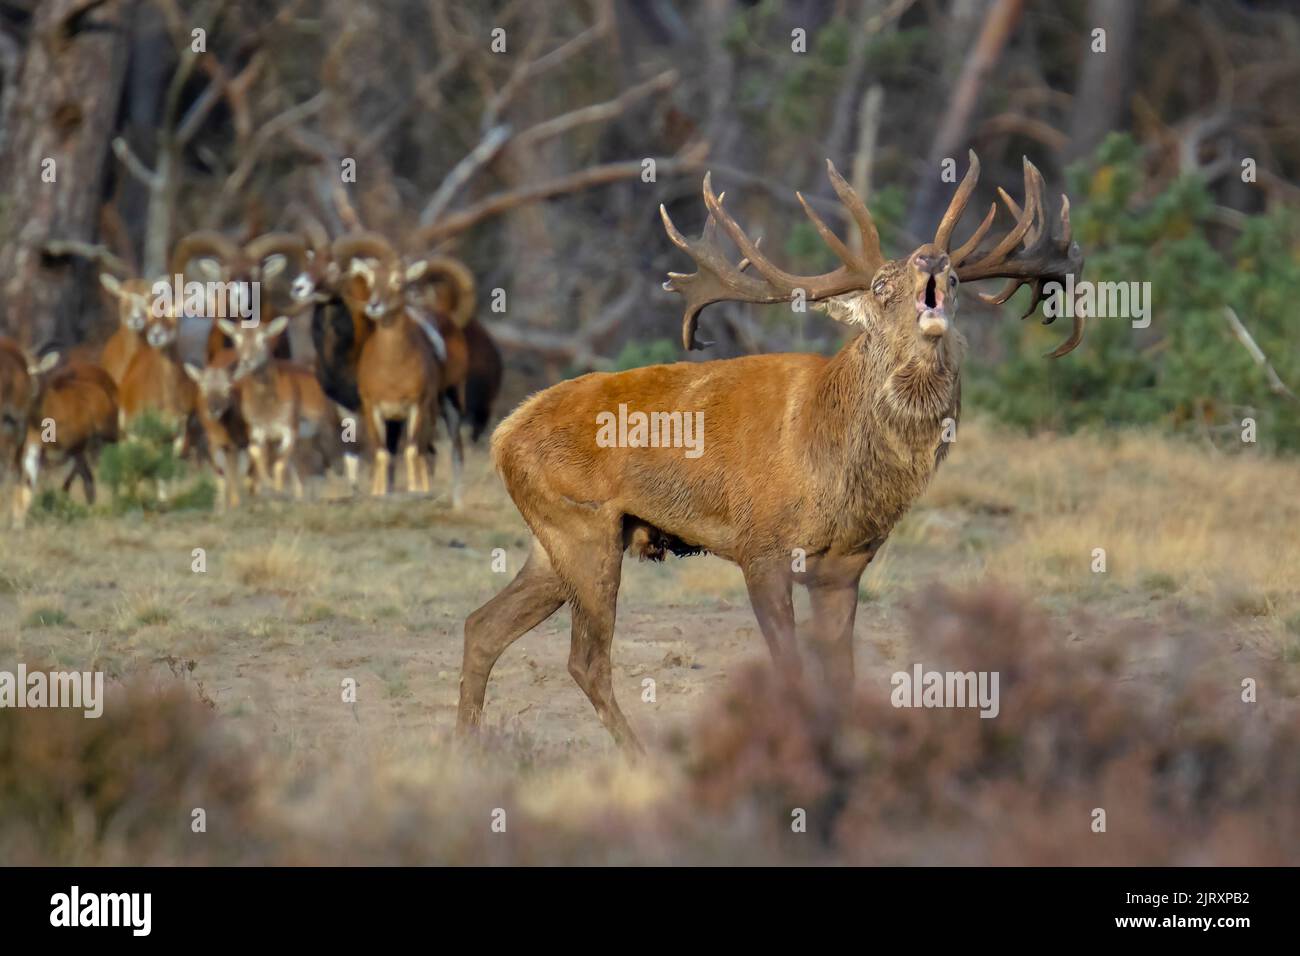 Red deer male, cervus elaphus, rutting during mating season on a field near a forest in purple heather blooming. National parc de Hoge Veluwe Stock Photo